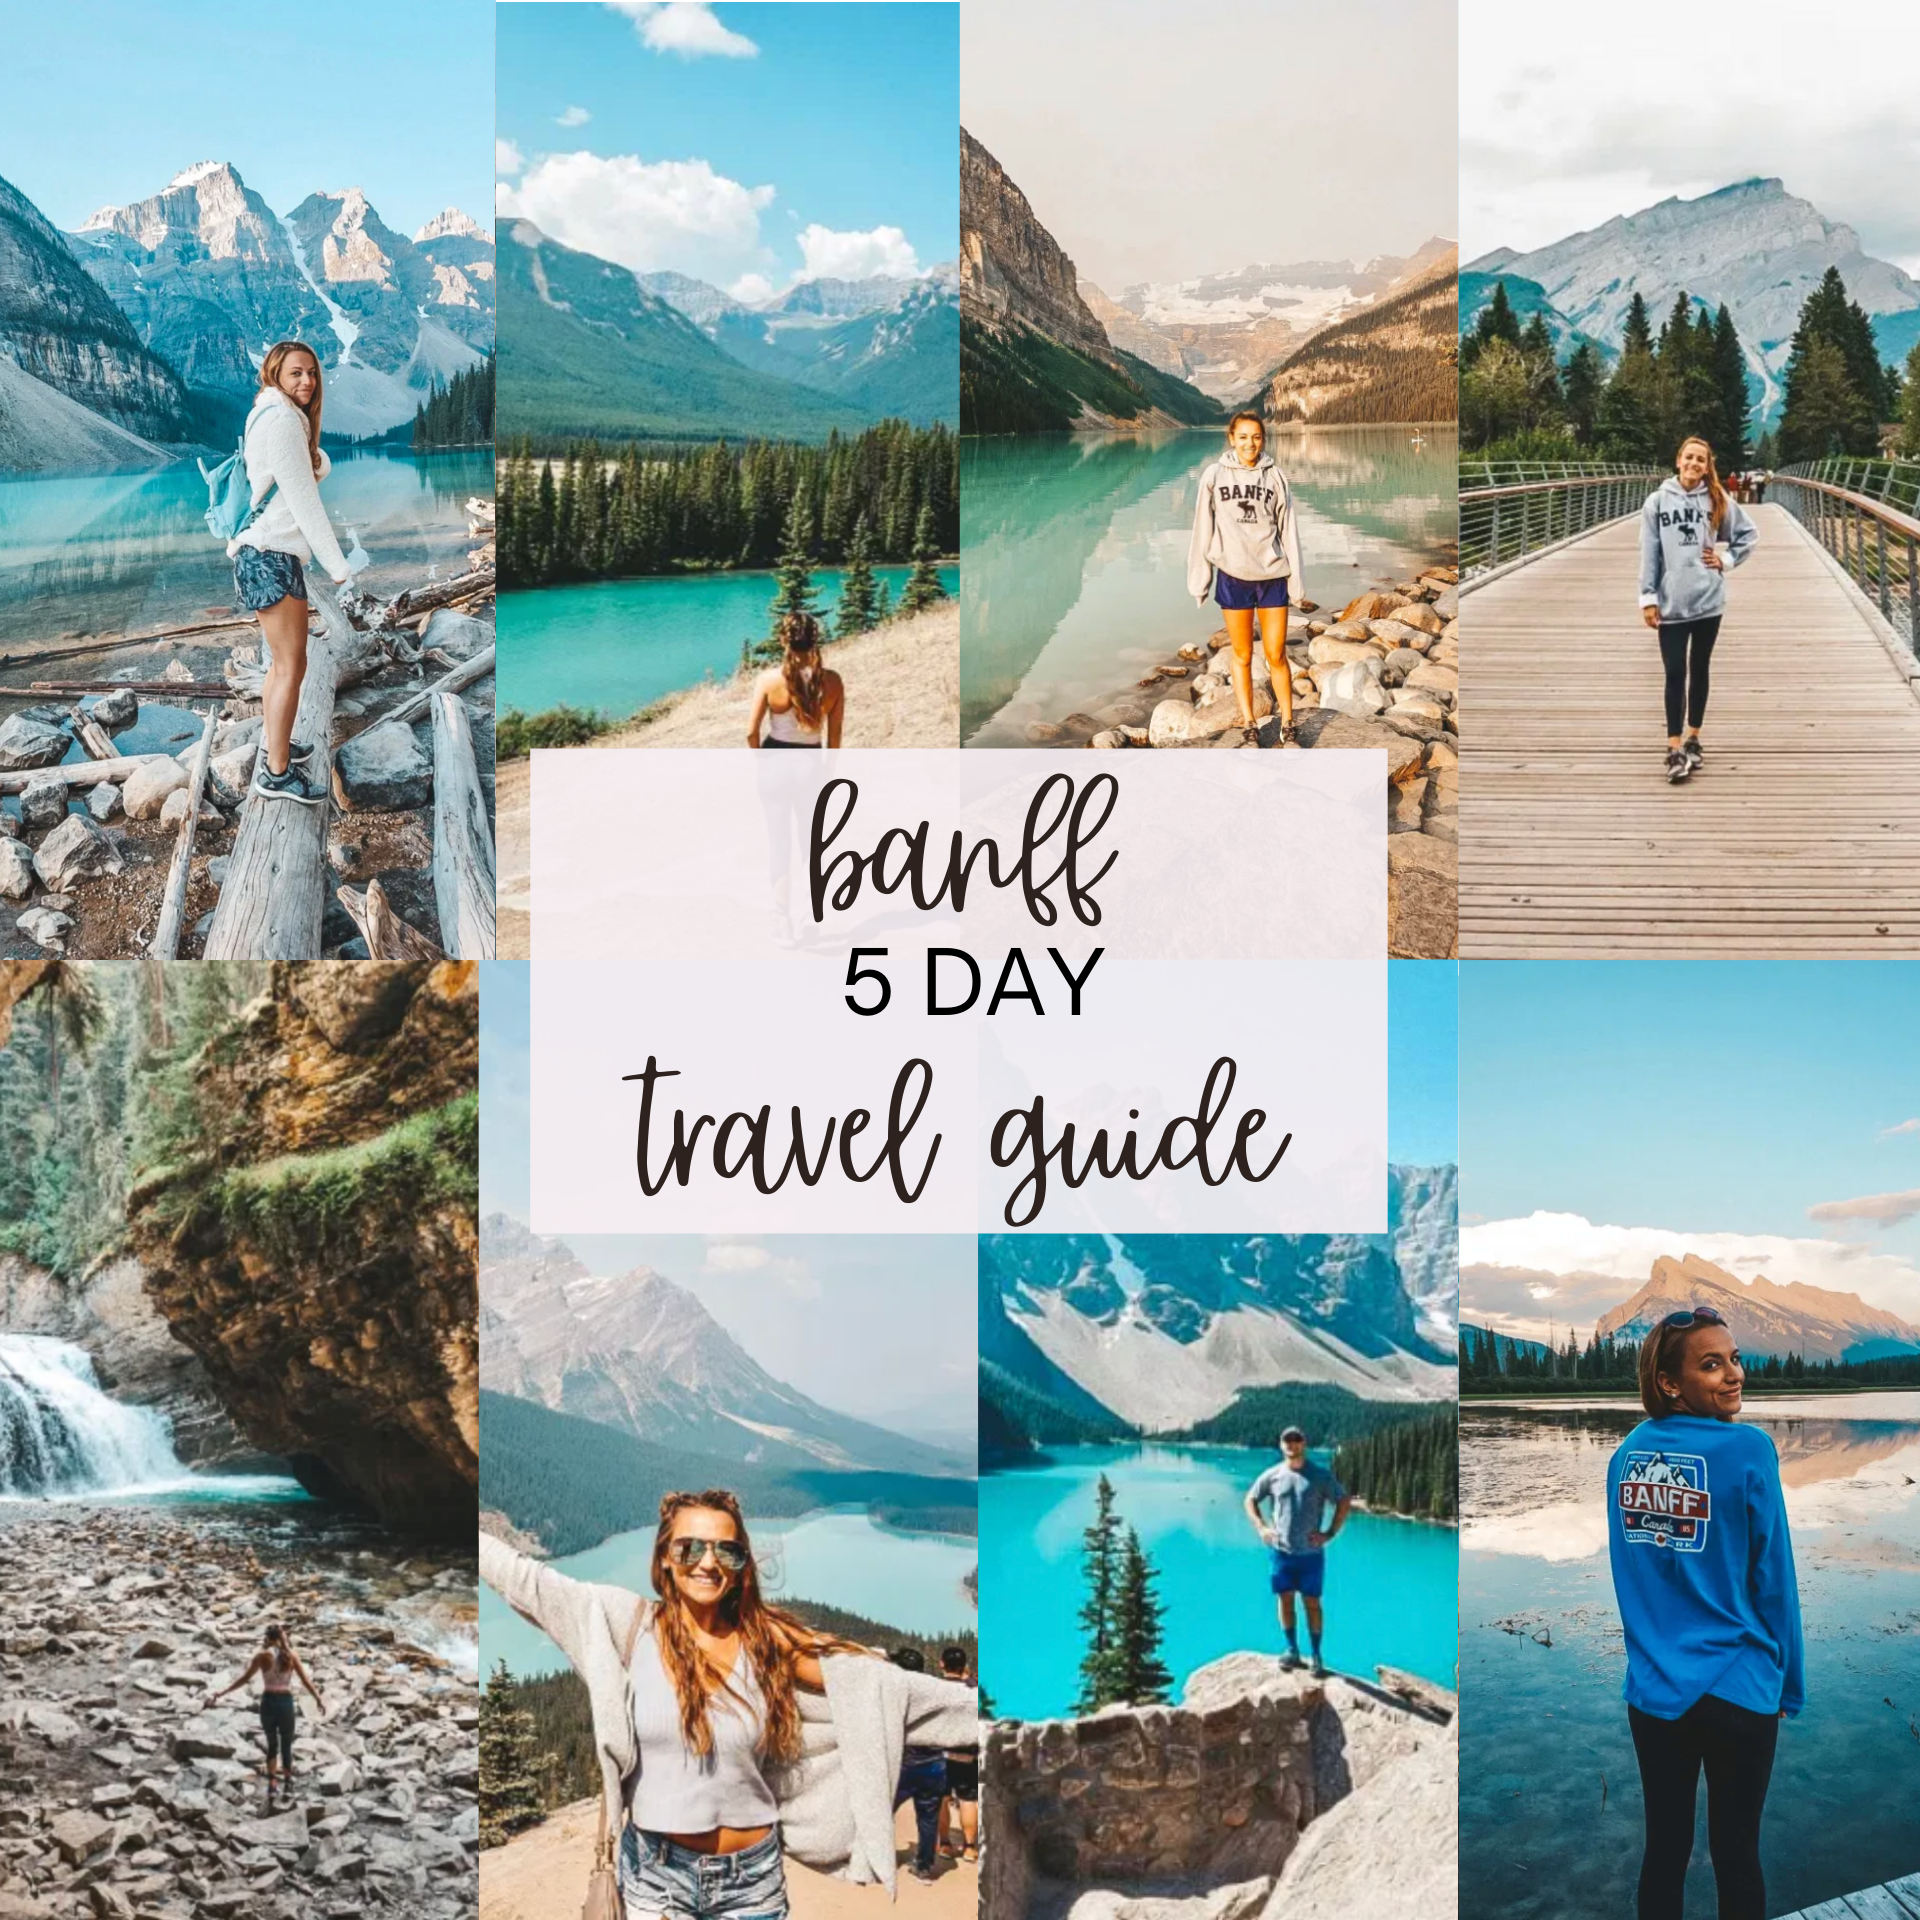 Banff Travel Guide - Complete 5 Day Itinerary